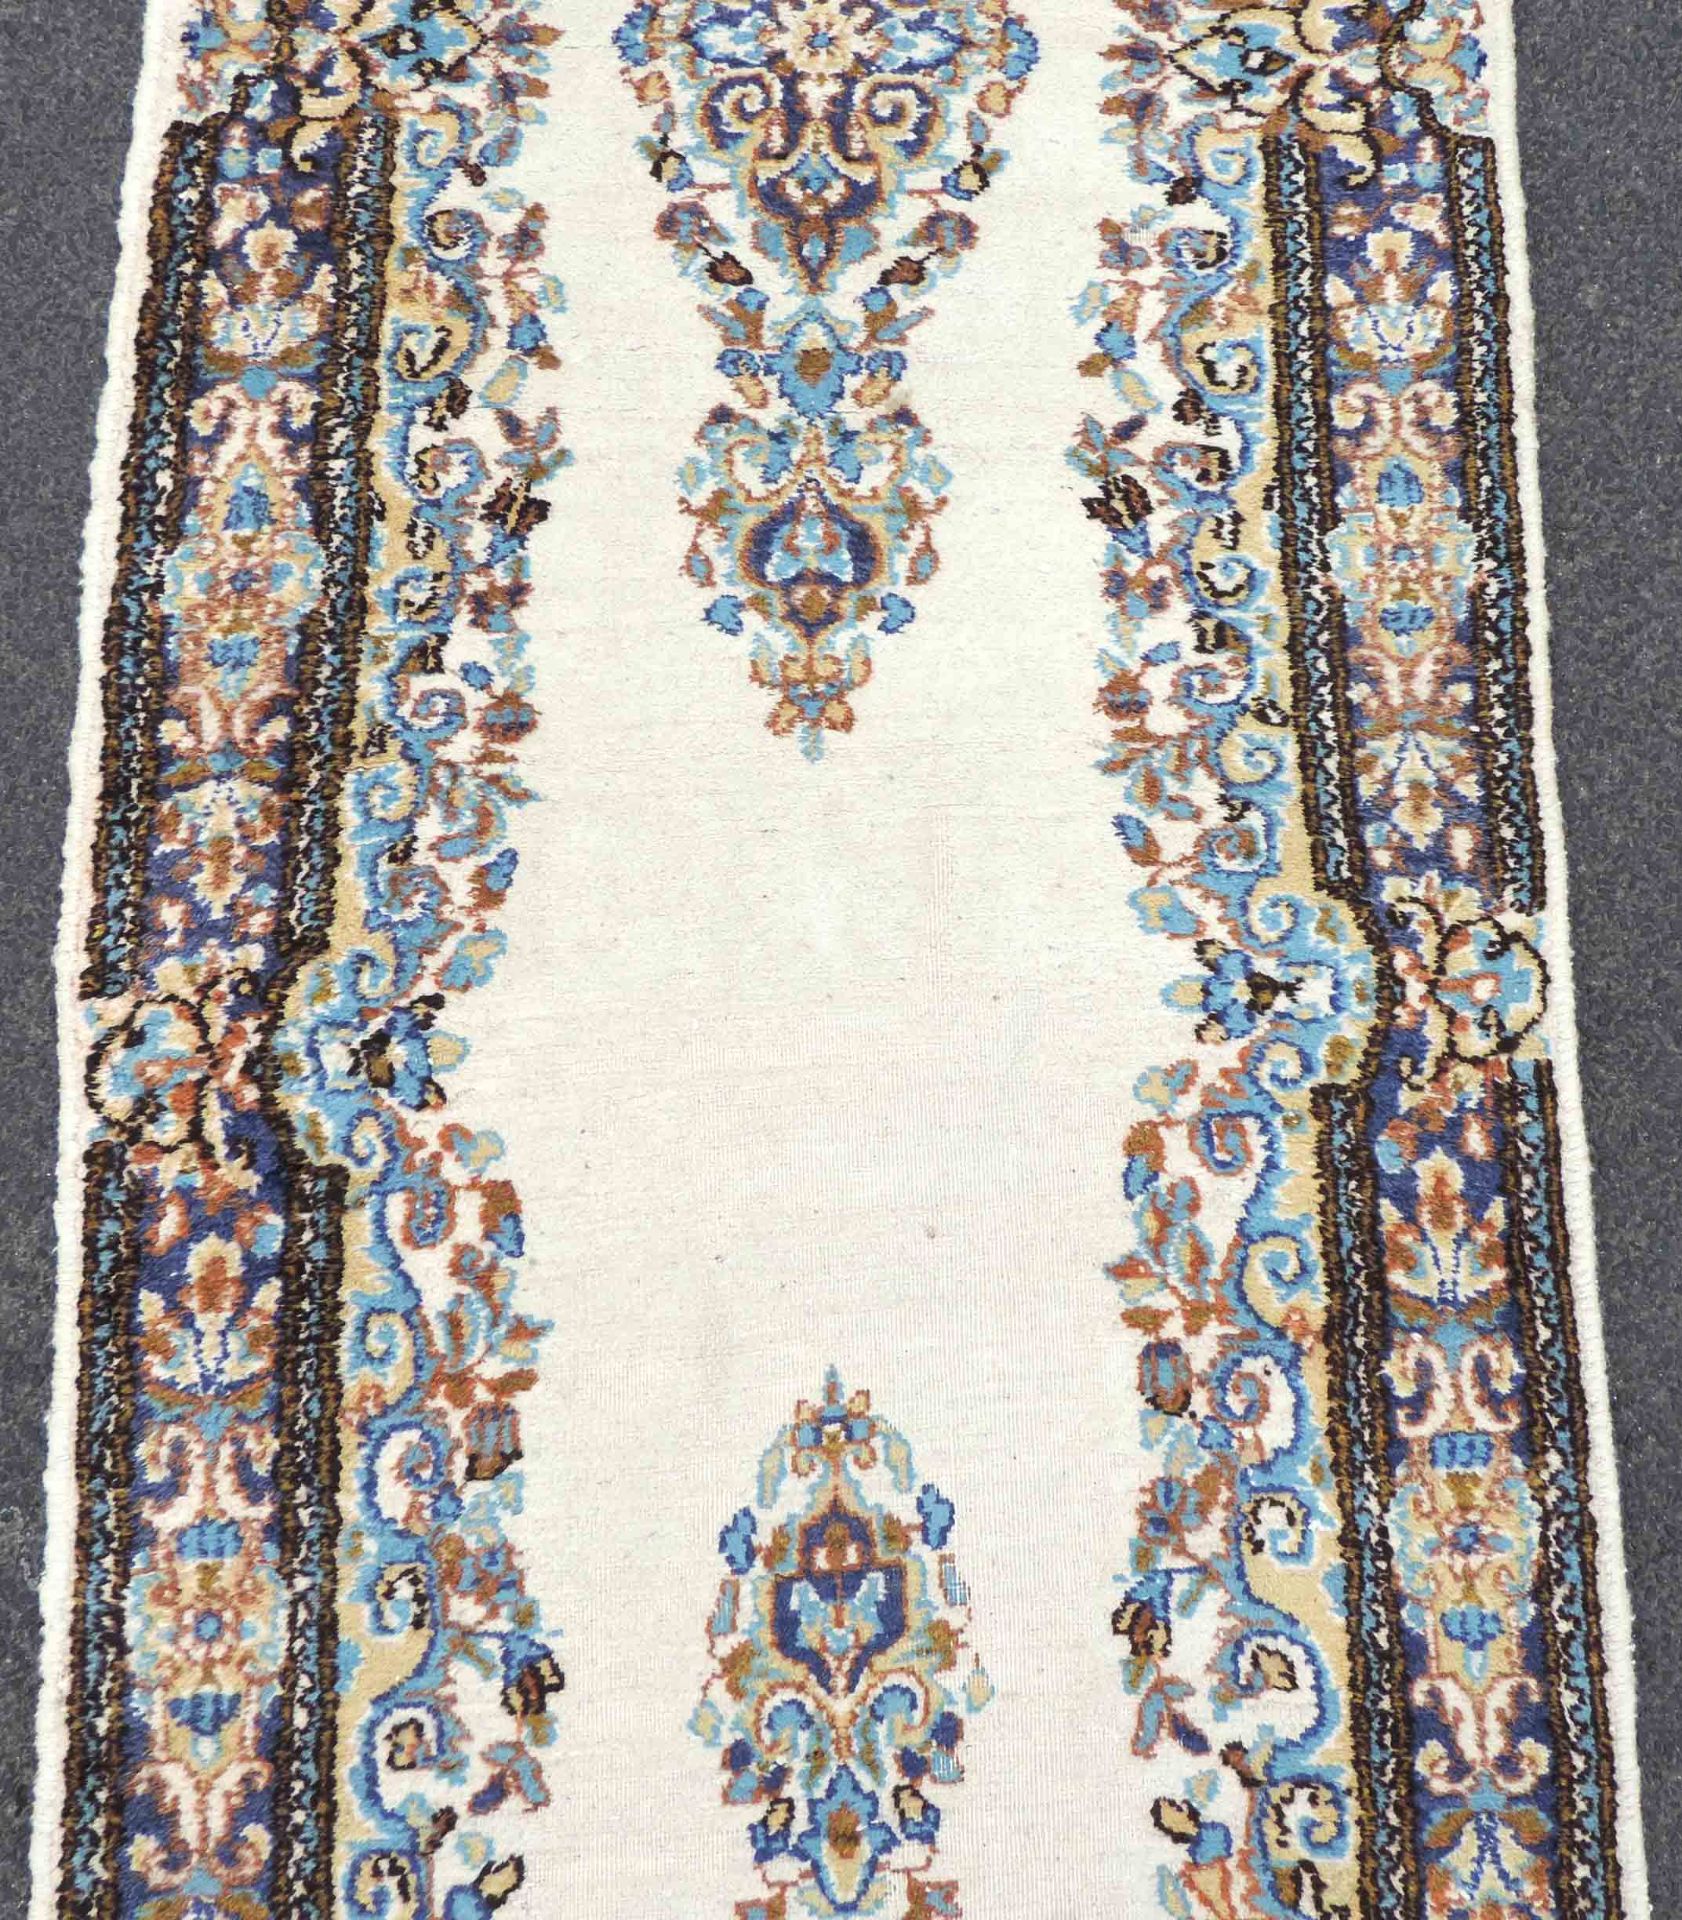 Kirman Persian rug. Narrow runner. Iran.370 cm x 63 cm. Knotted by hand. Wool on cotton. No shipping - Image 4 of 9